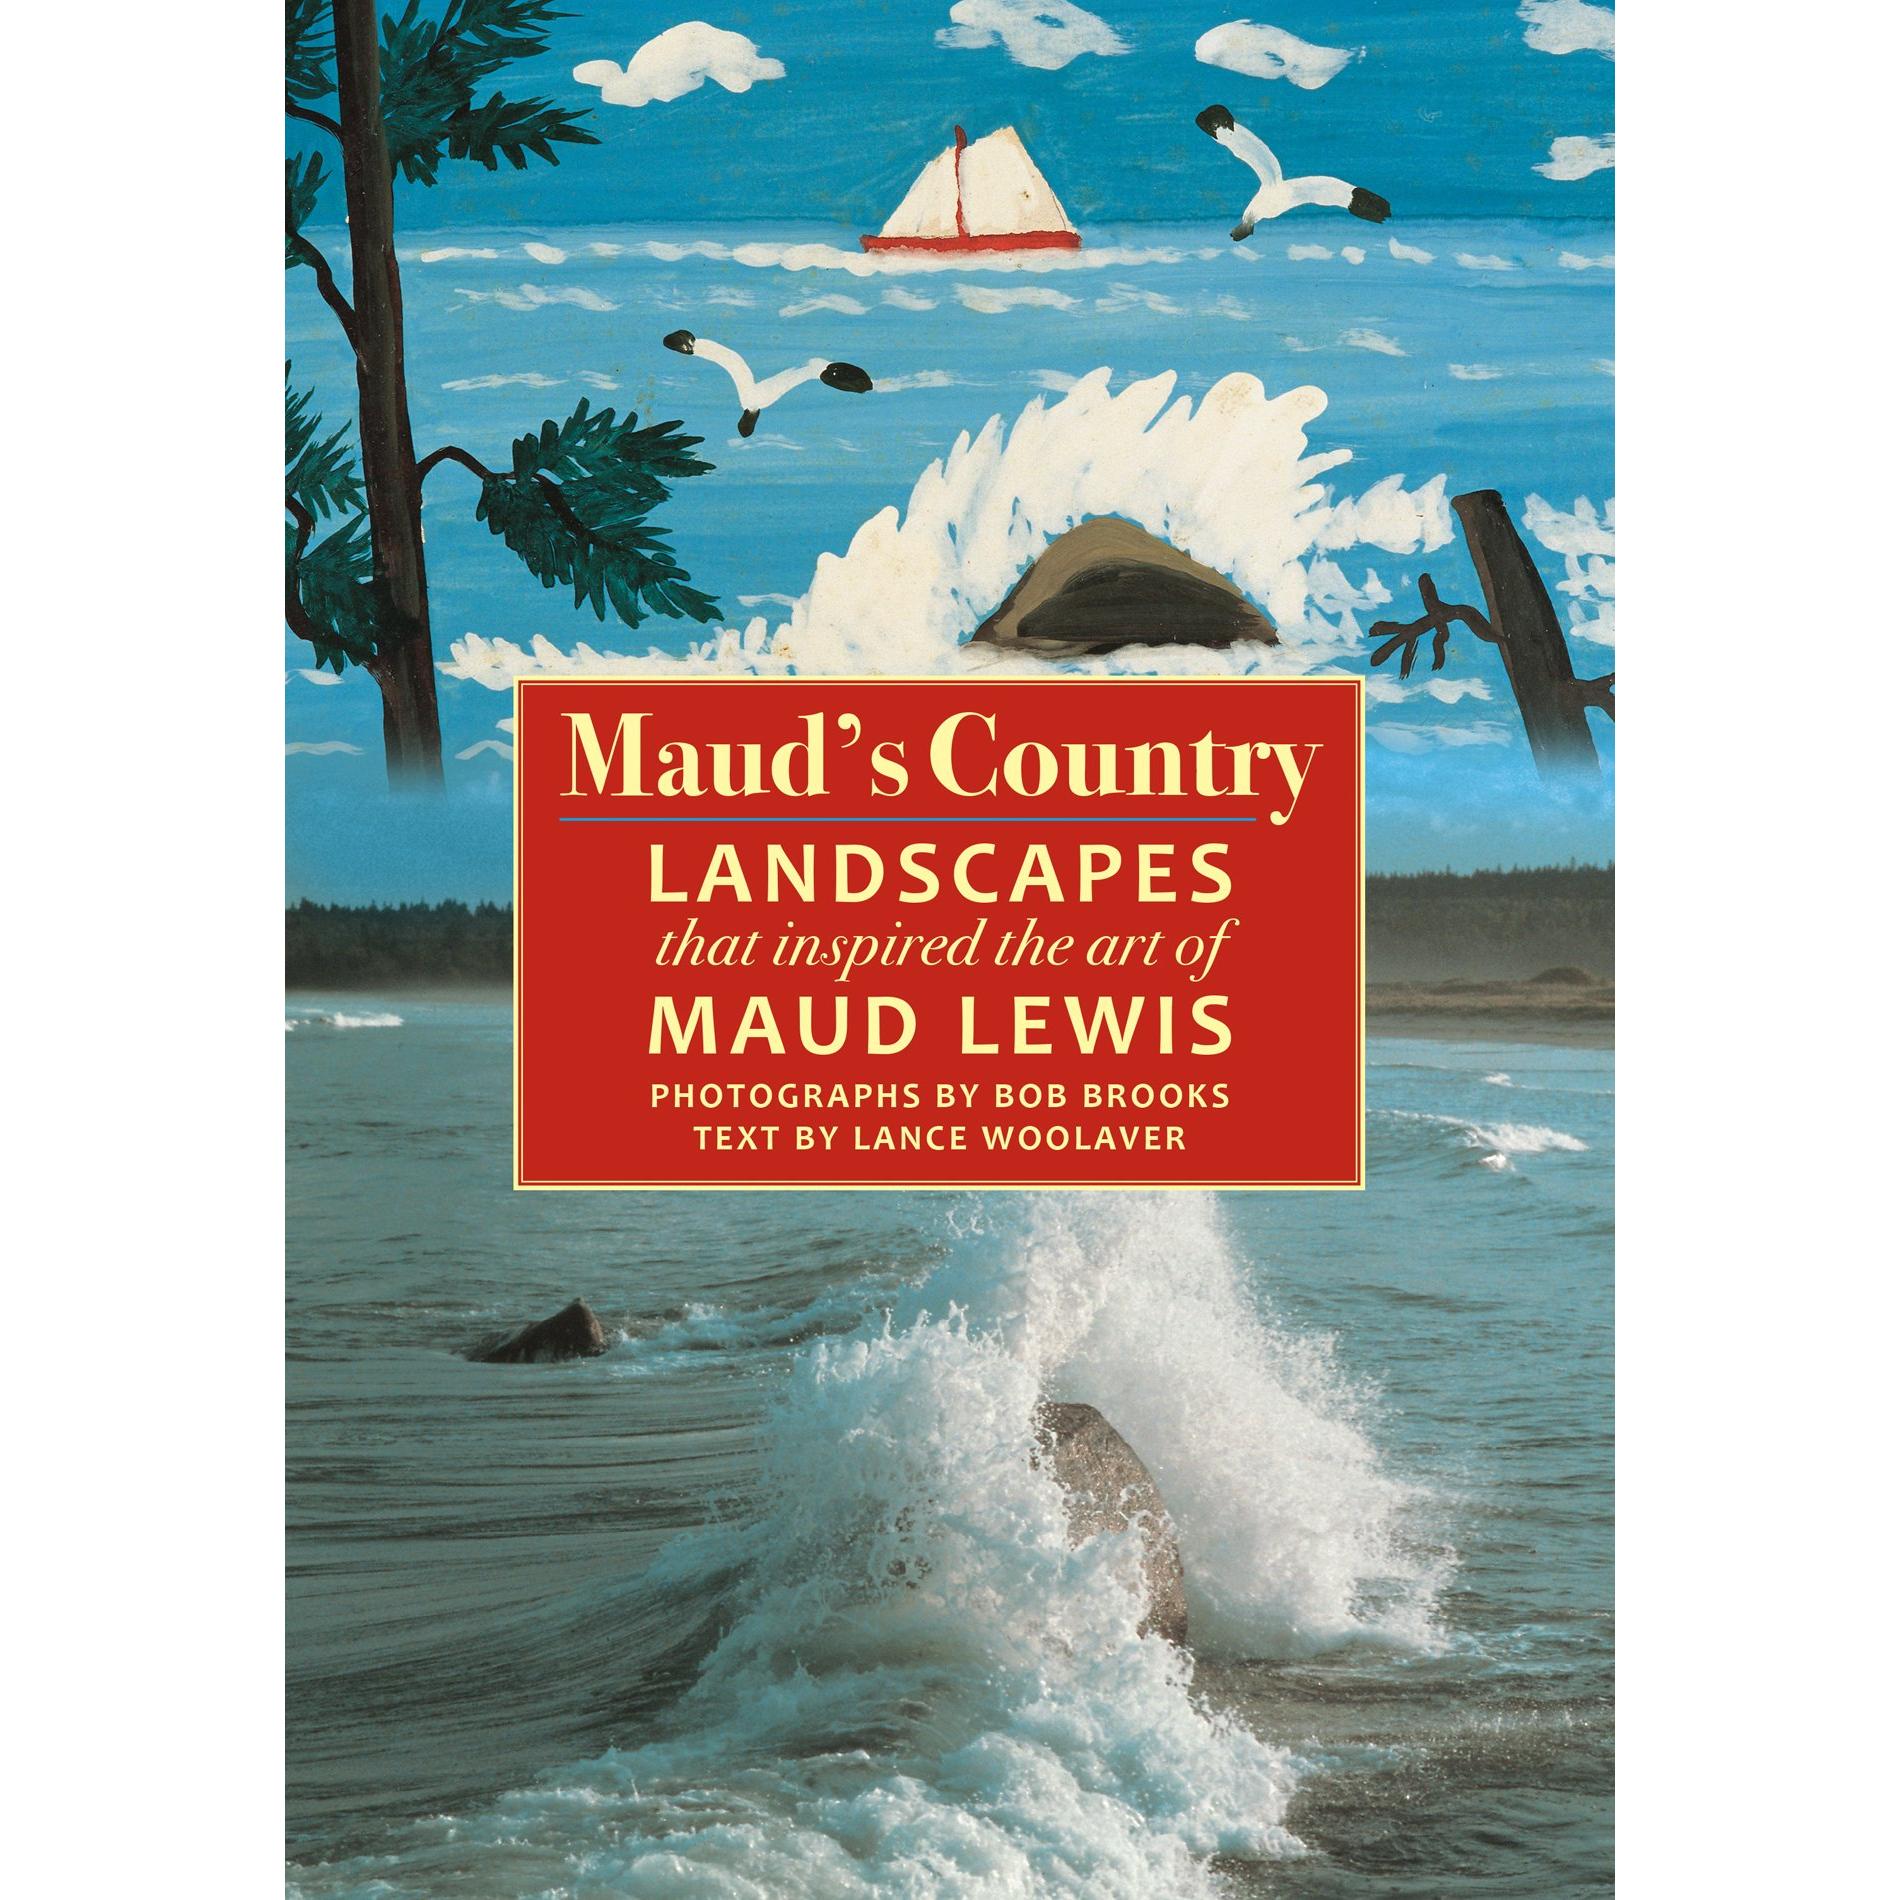 Maud's Country: Landscapes that Inspired the Art of Maud Lewis